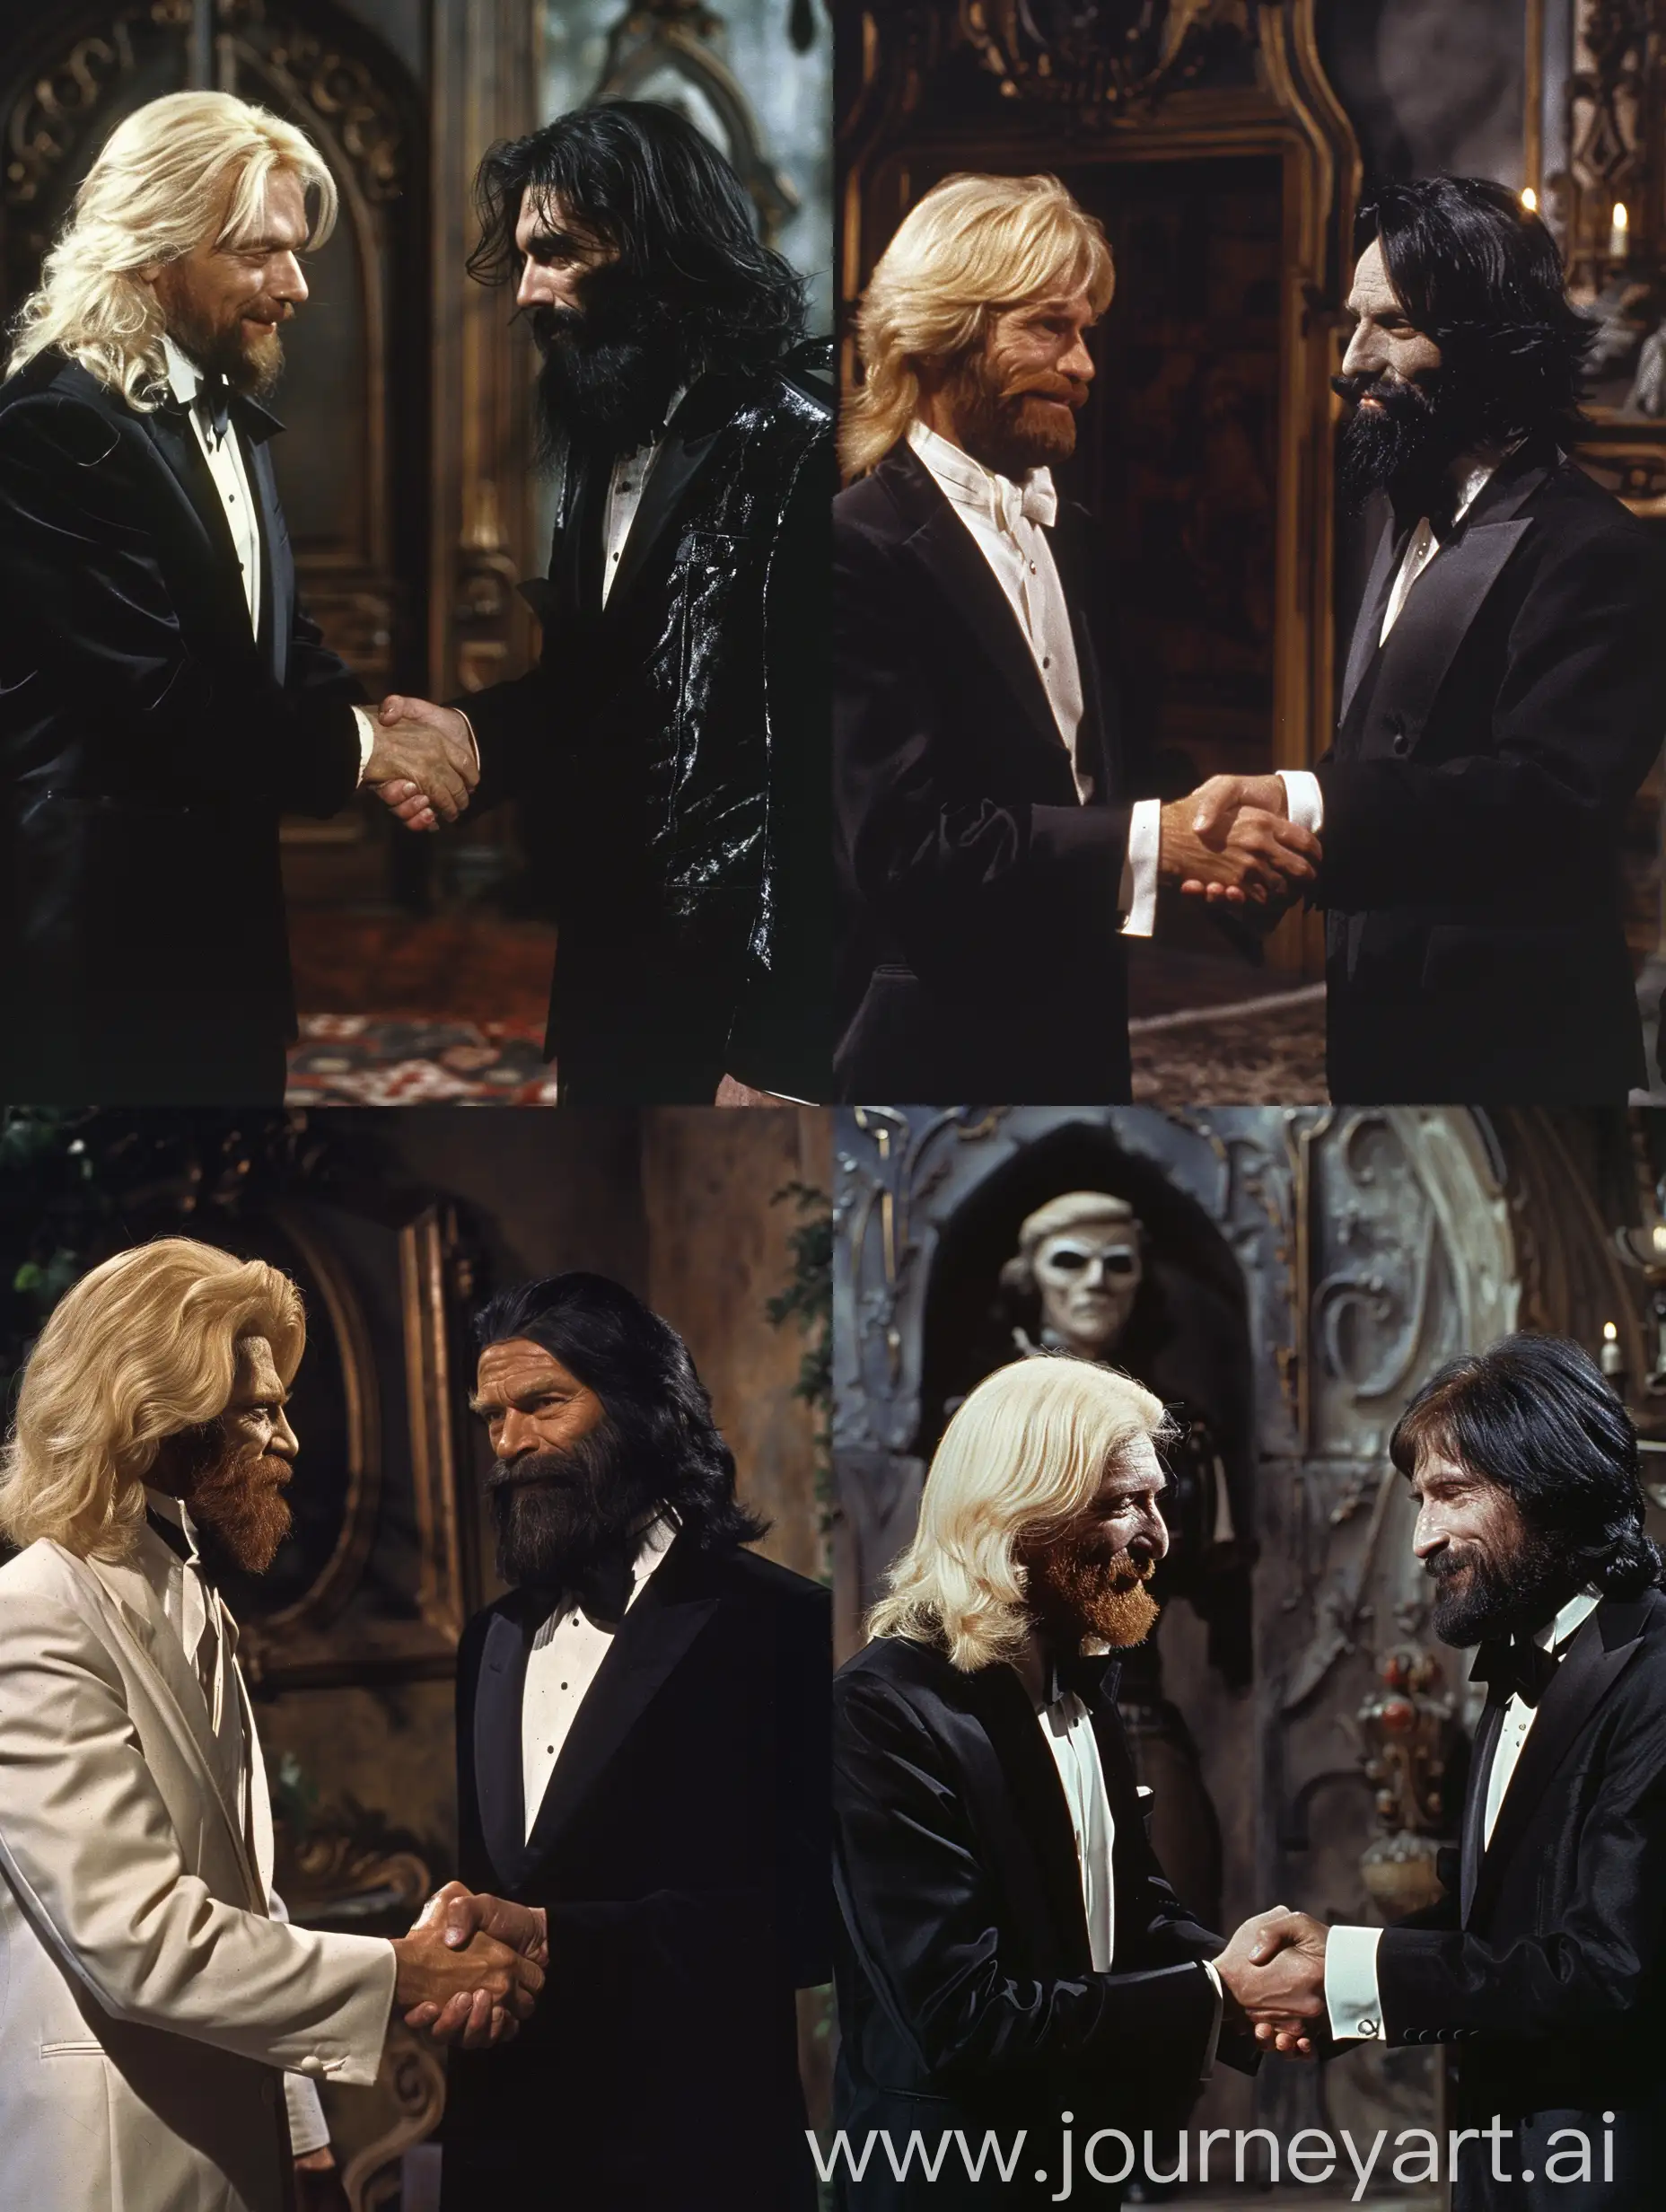 Dark-Fantasy-Horror-Mysterious-Encounter-Between-Blond-and-BlackHaired-Men-in-Tuxedos